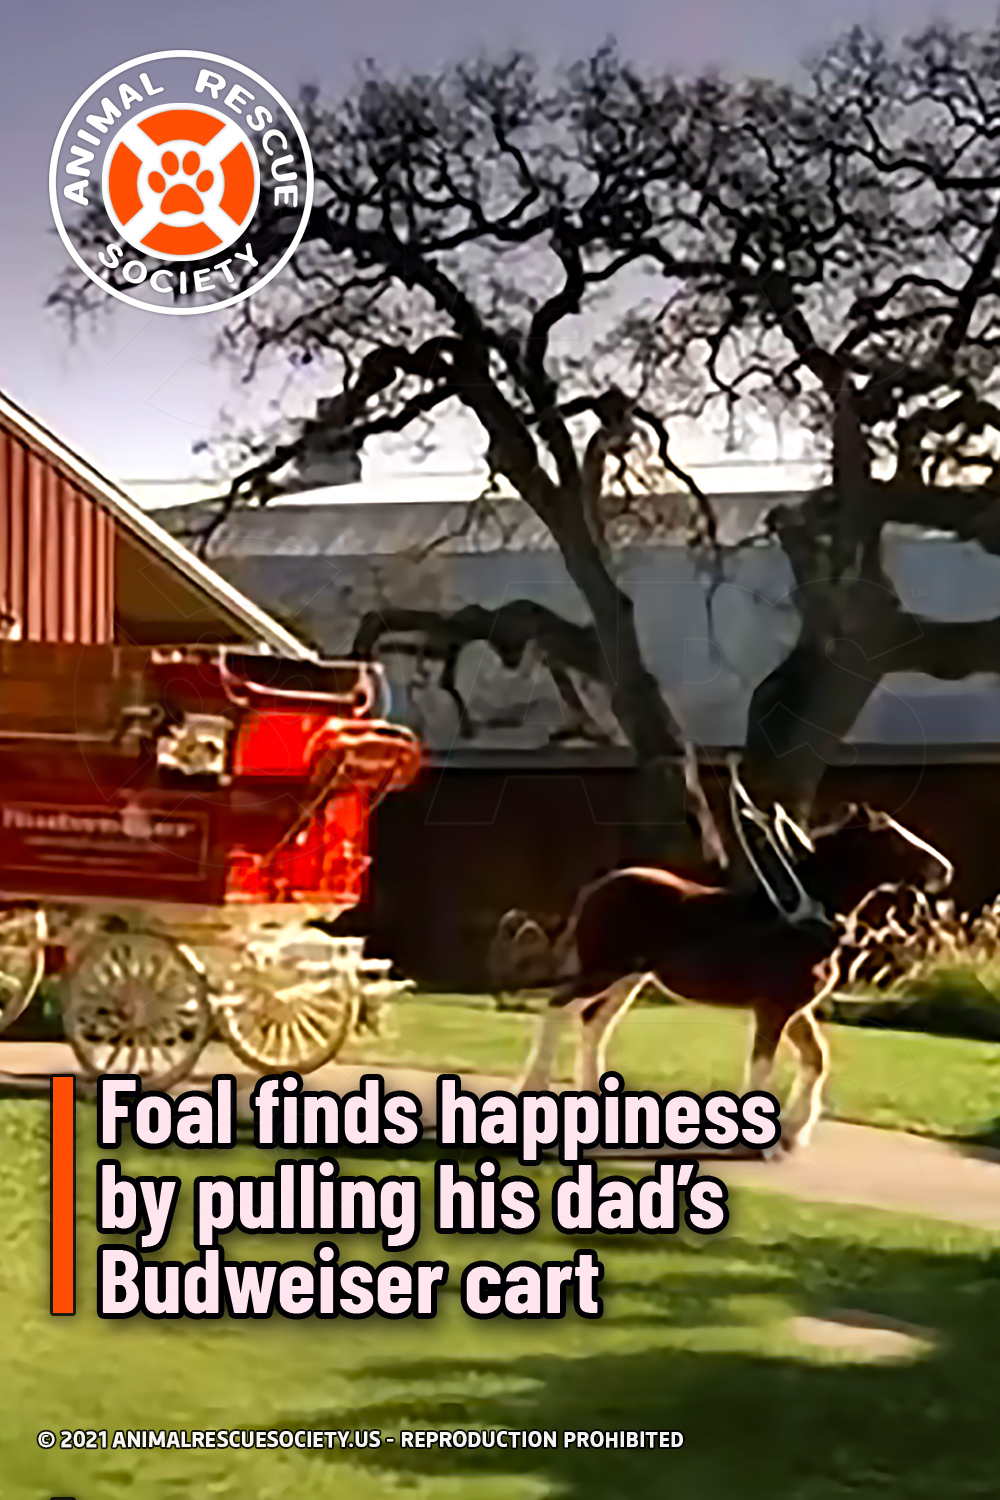 Foal finds happiness by pulling his dad’s Budweiser cart